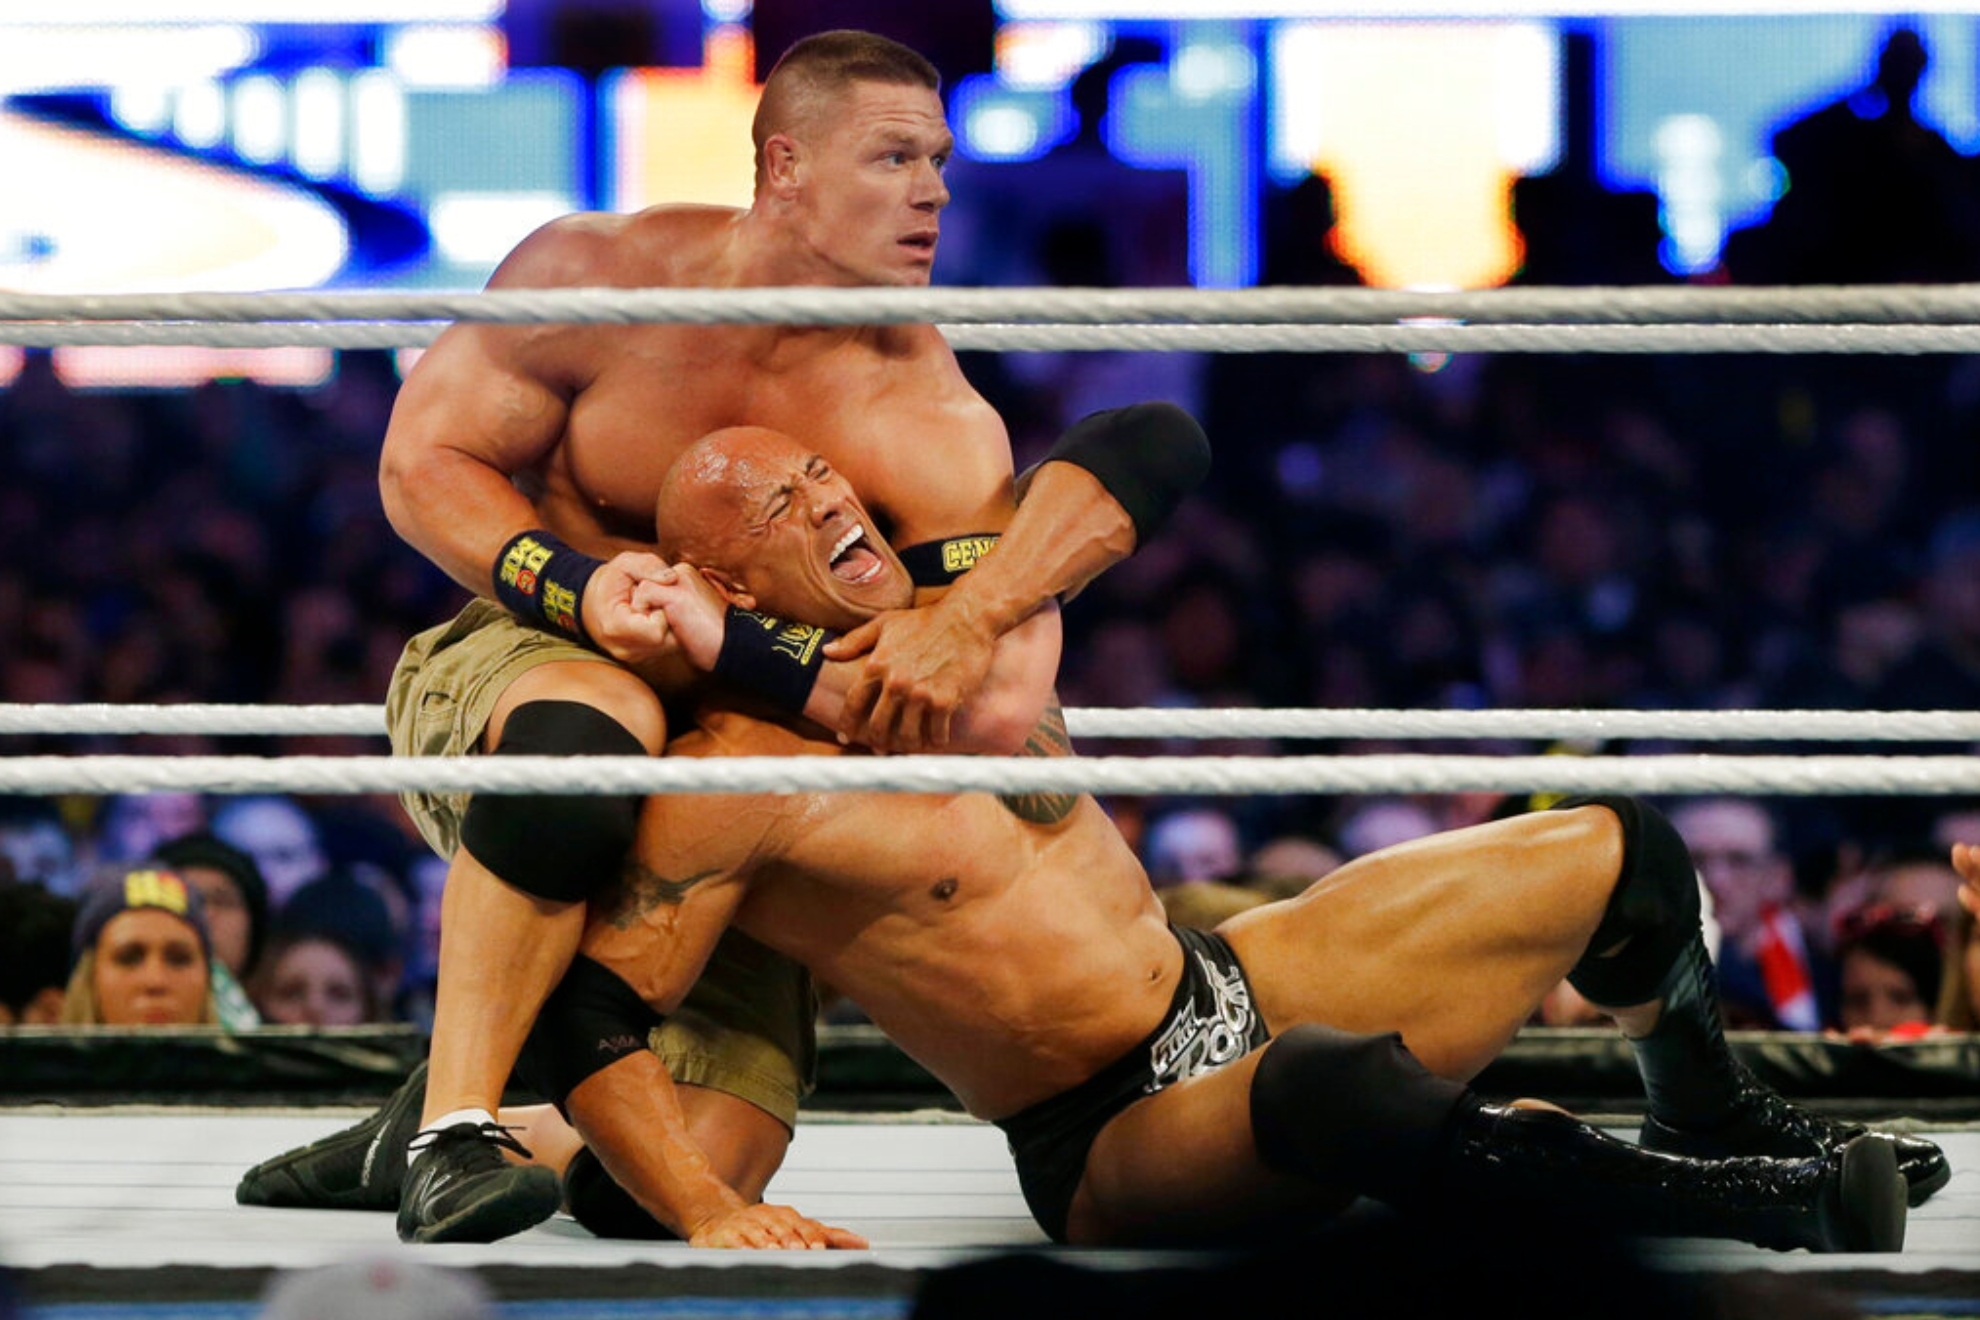 John Cena was seen by many as hypocrticial for his comments